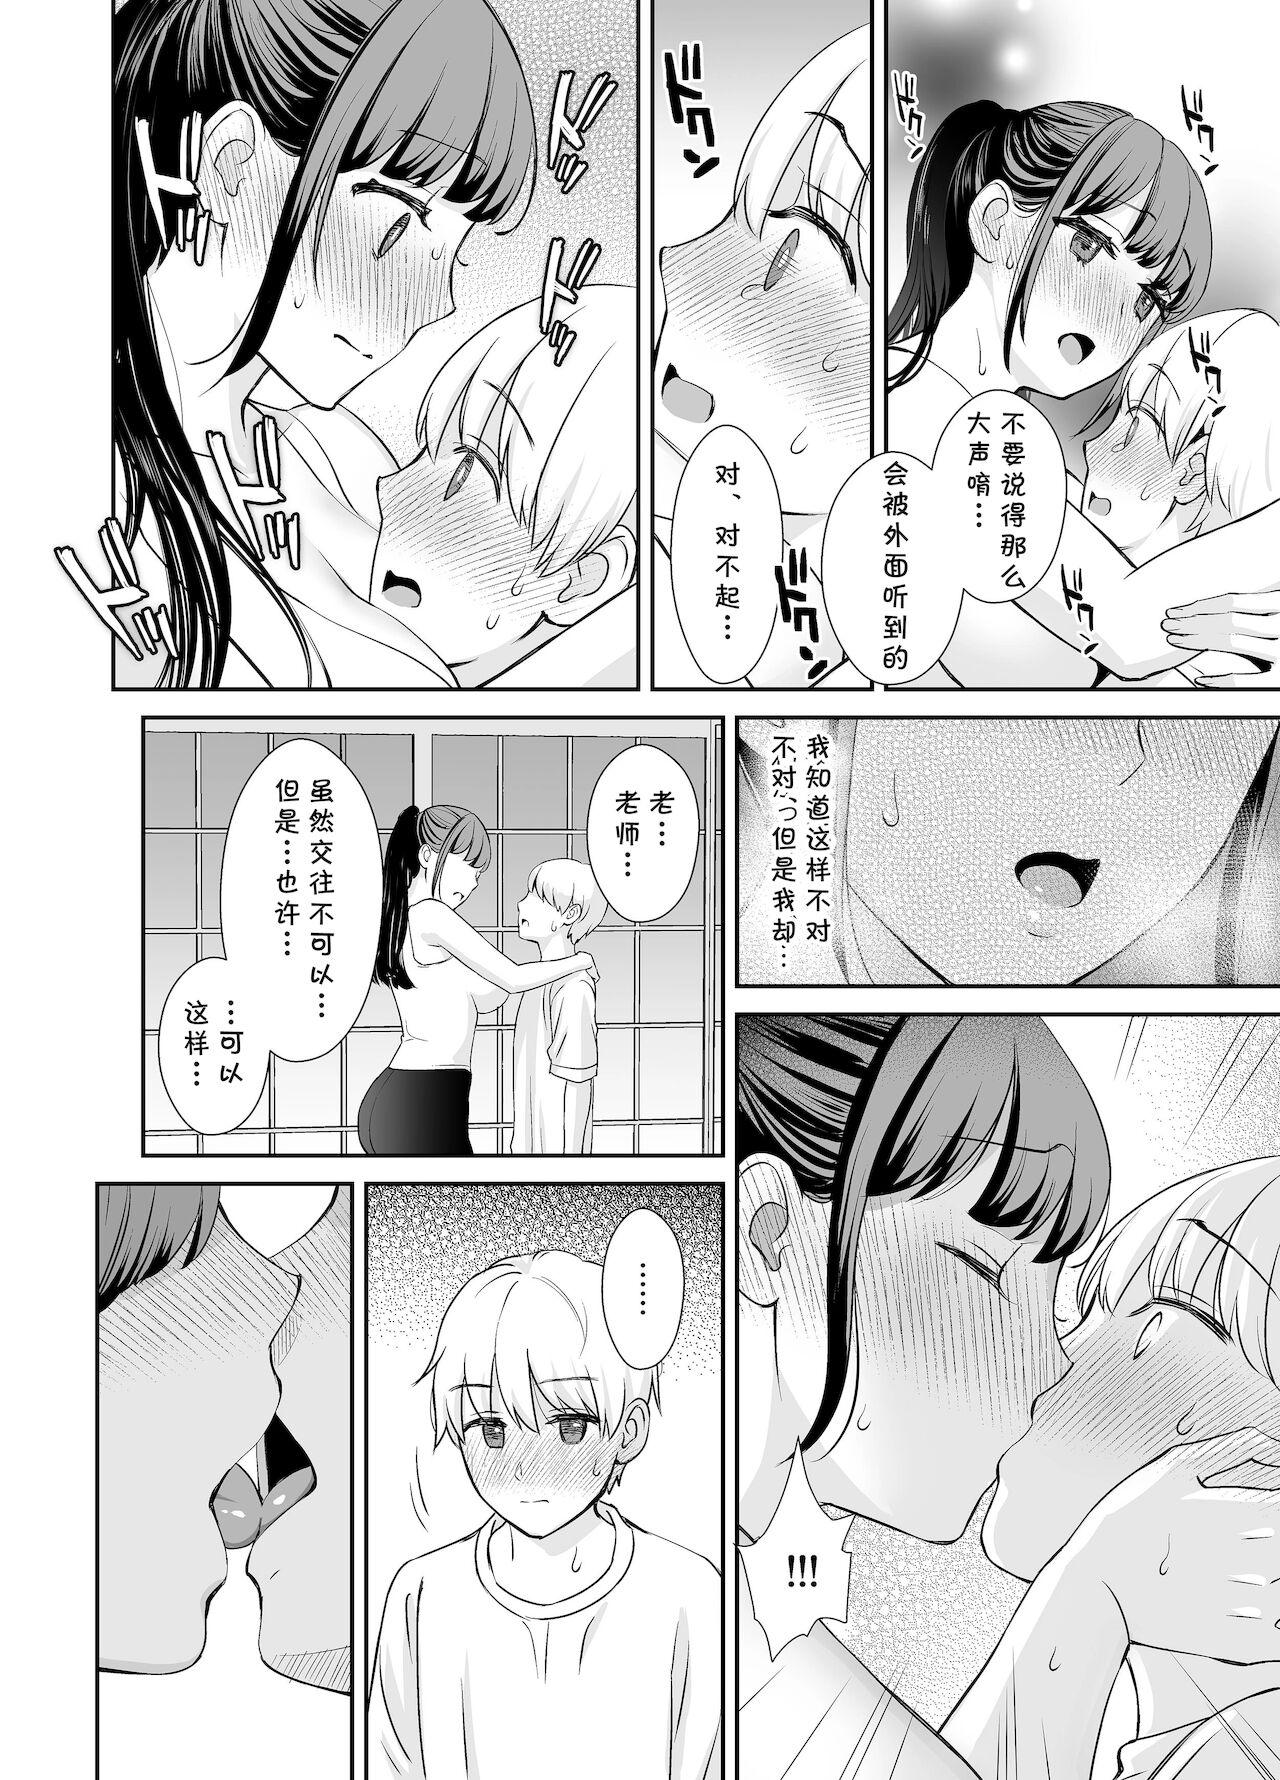 Blows 彼氏持ちの先生と生徒 Eating Pussy - Page 11